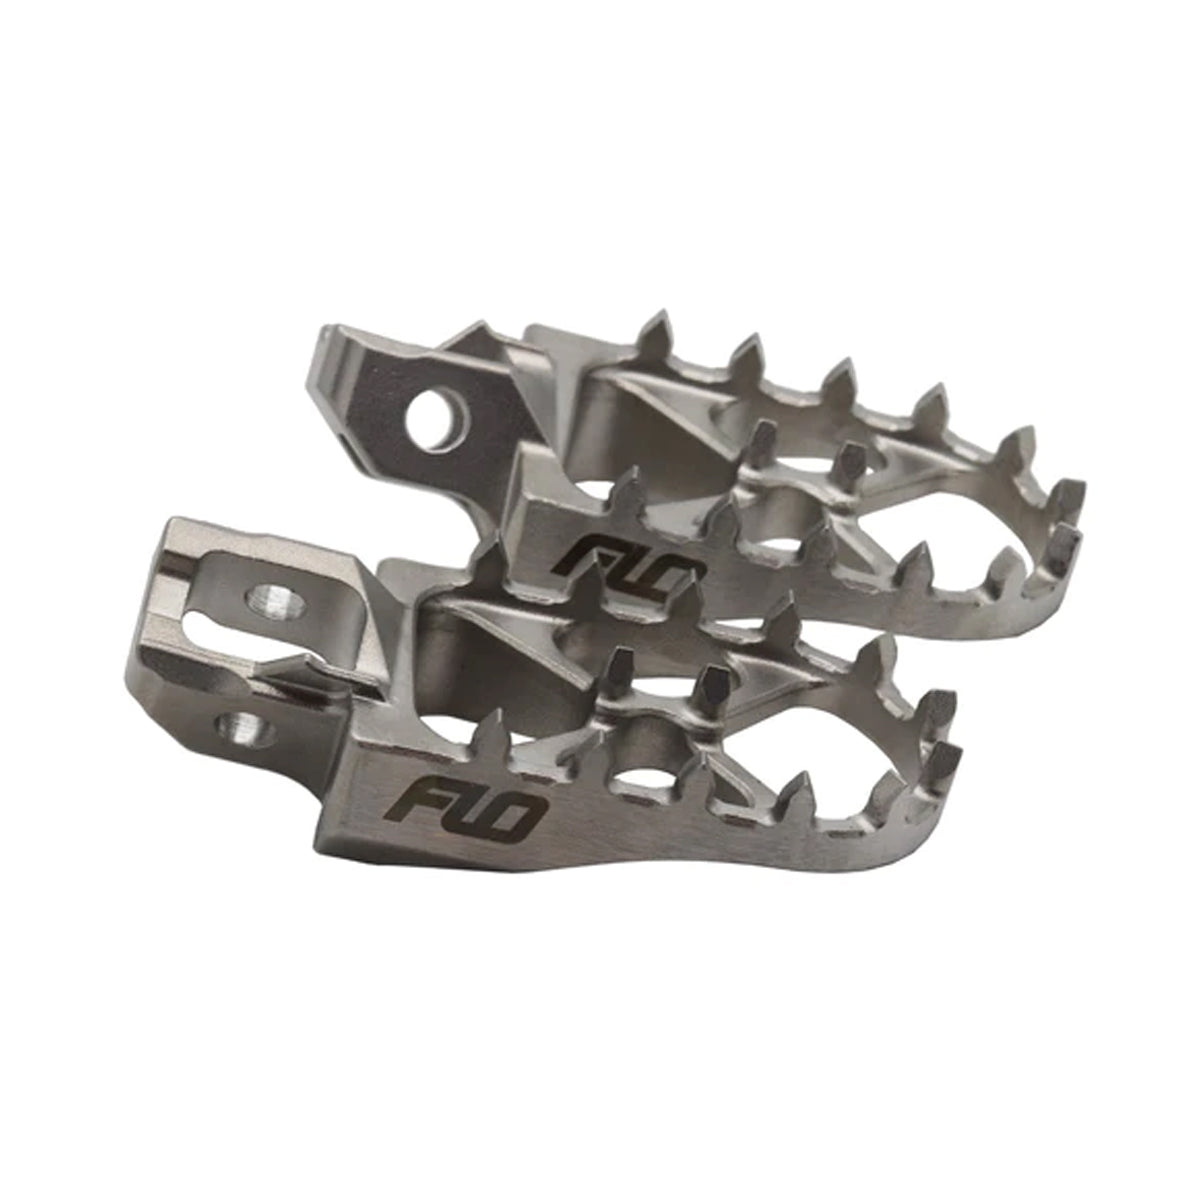 Flo Stainless Foot Pegs - YZ (Aftermarket Pegbars)